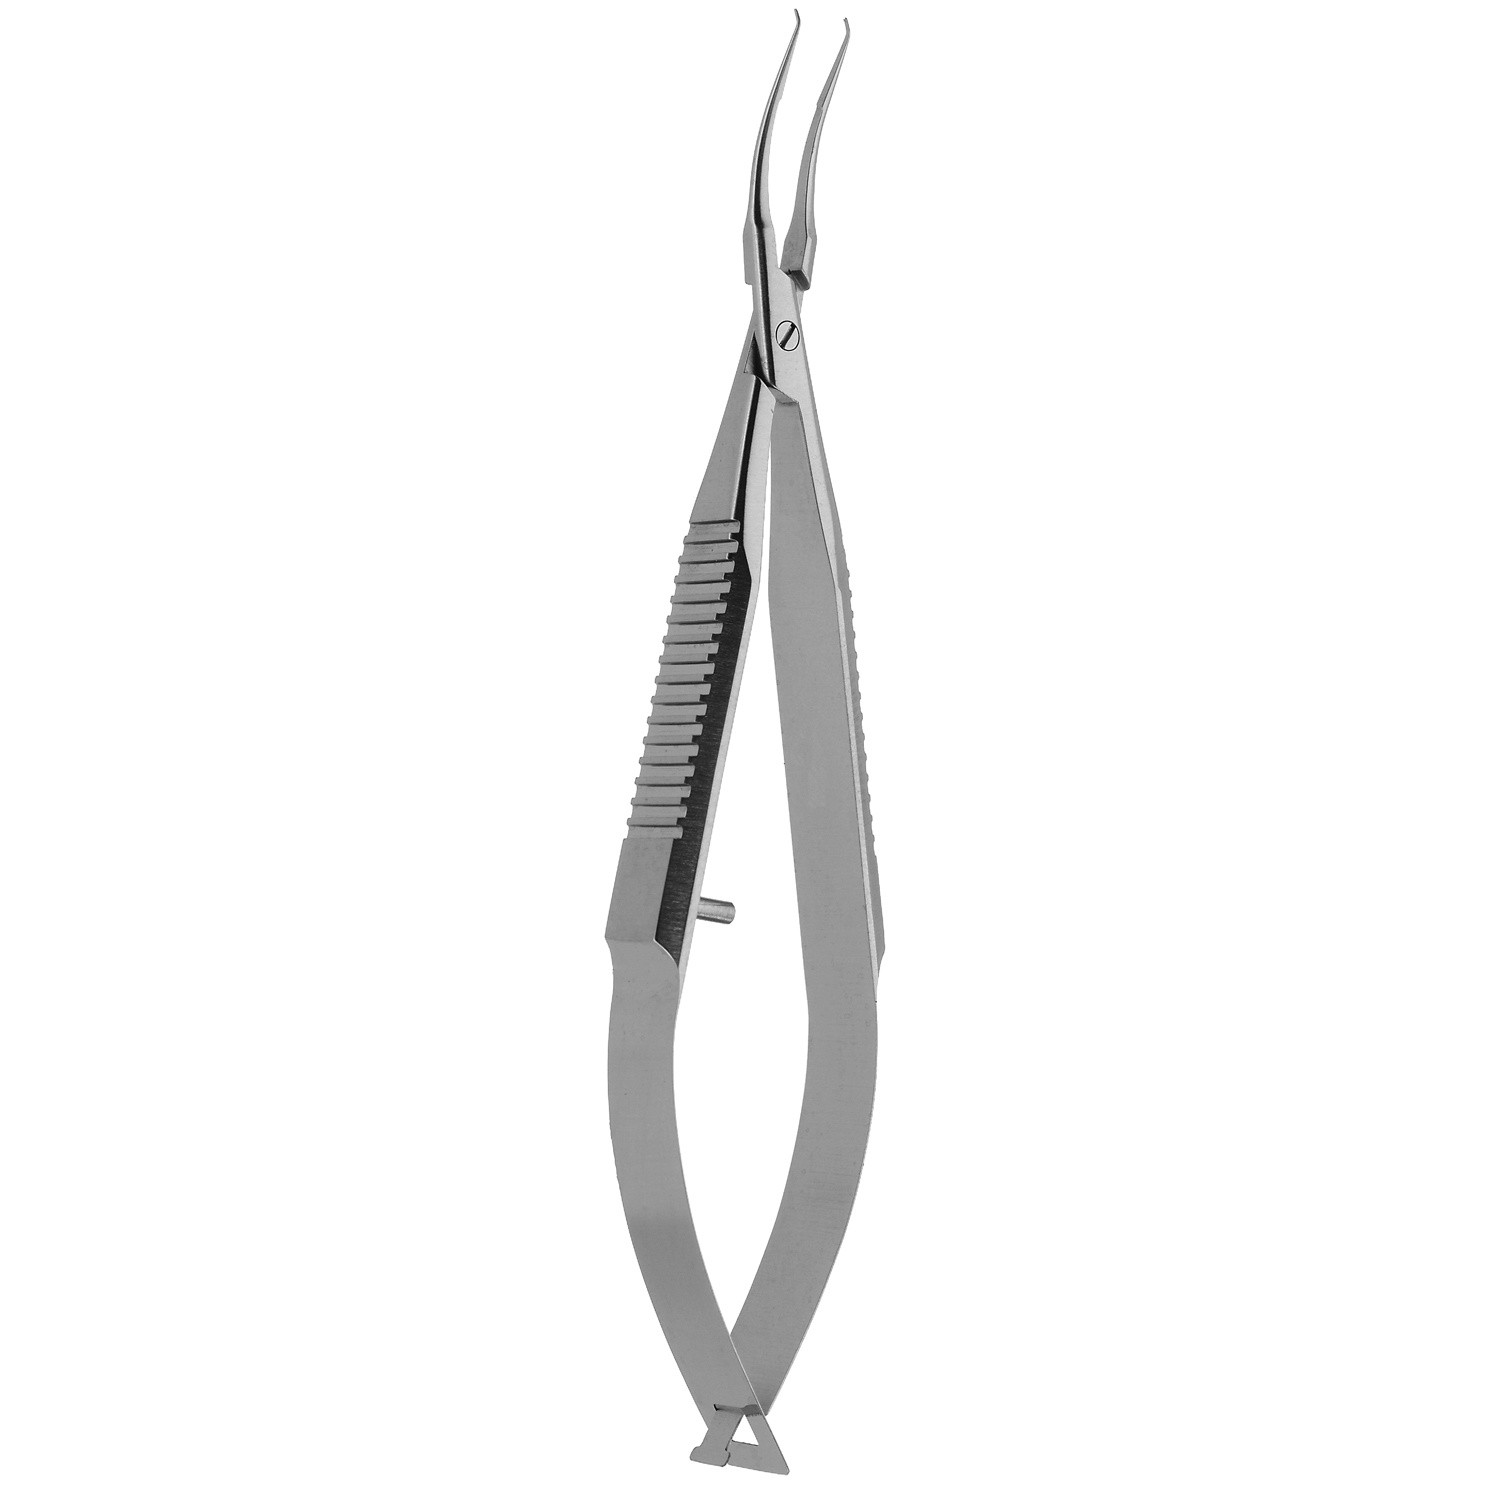 Maumenee Corneal Forceps, Colibri Type W/ 0.5 Mm Tying Platform Mounted On A Pivot Action Handle, 0.10 Mm Teeth, 4 3/4" (12.0 Cm), Angled 45 Degrees